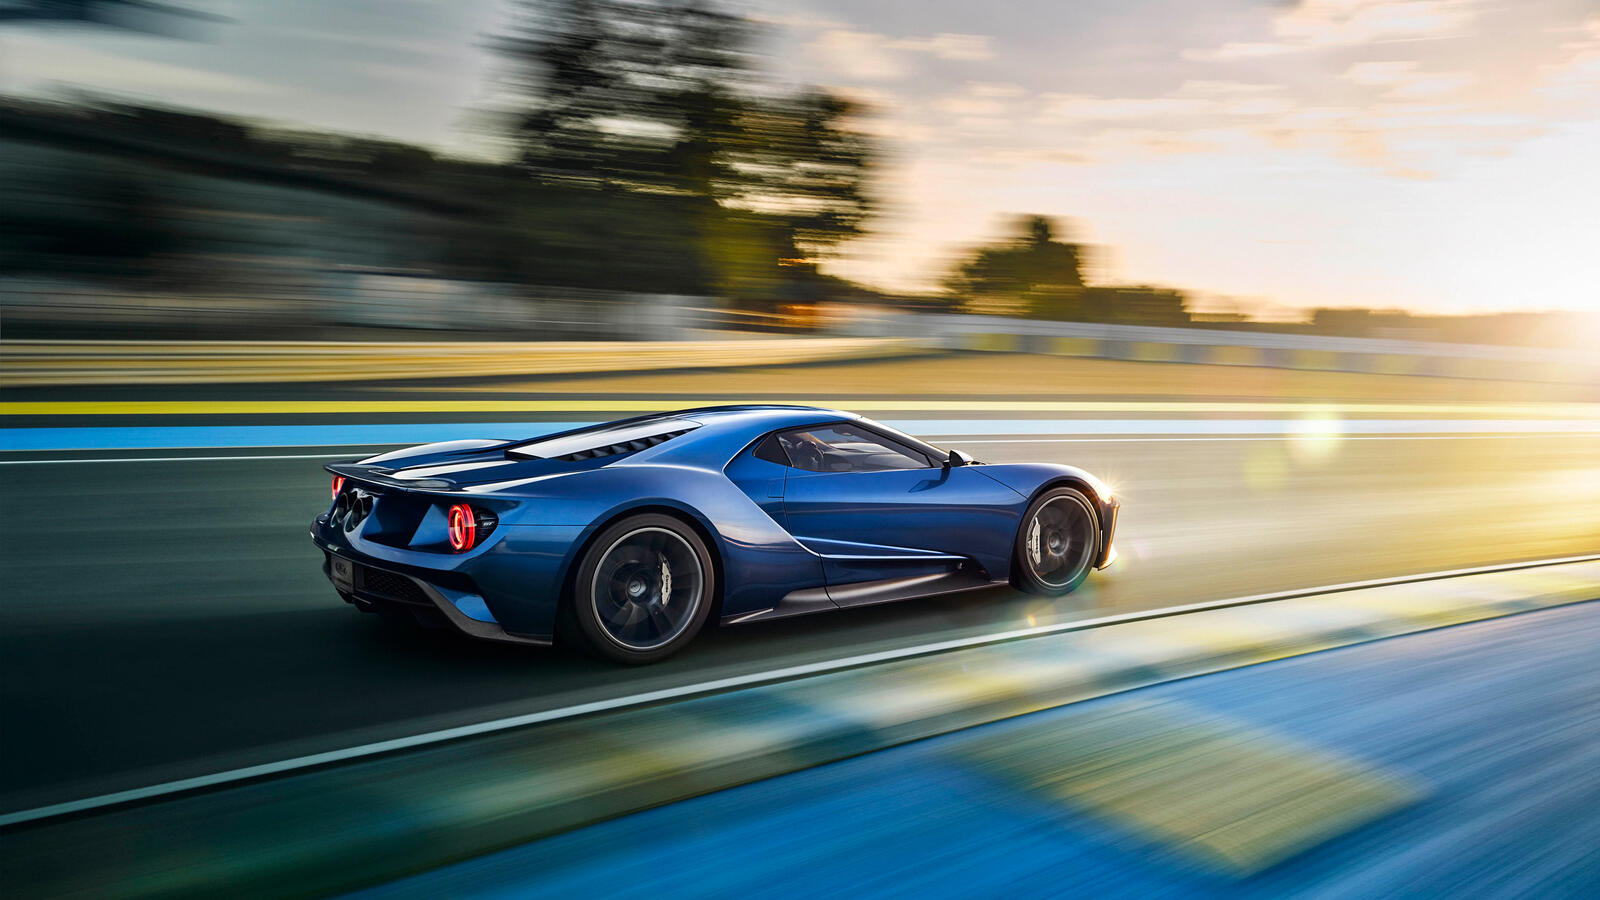 Wallpapers Ford cars gt on the desktop